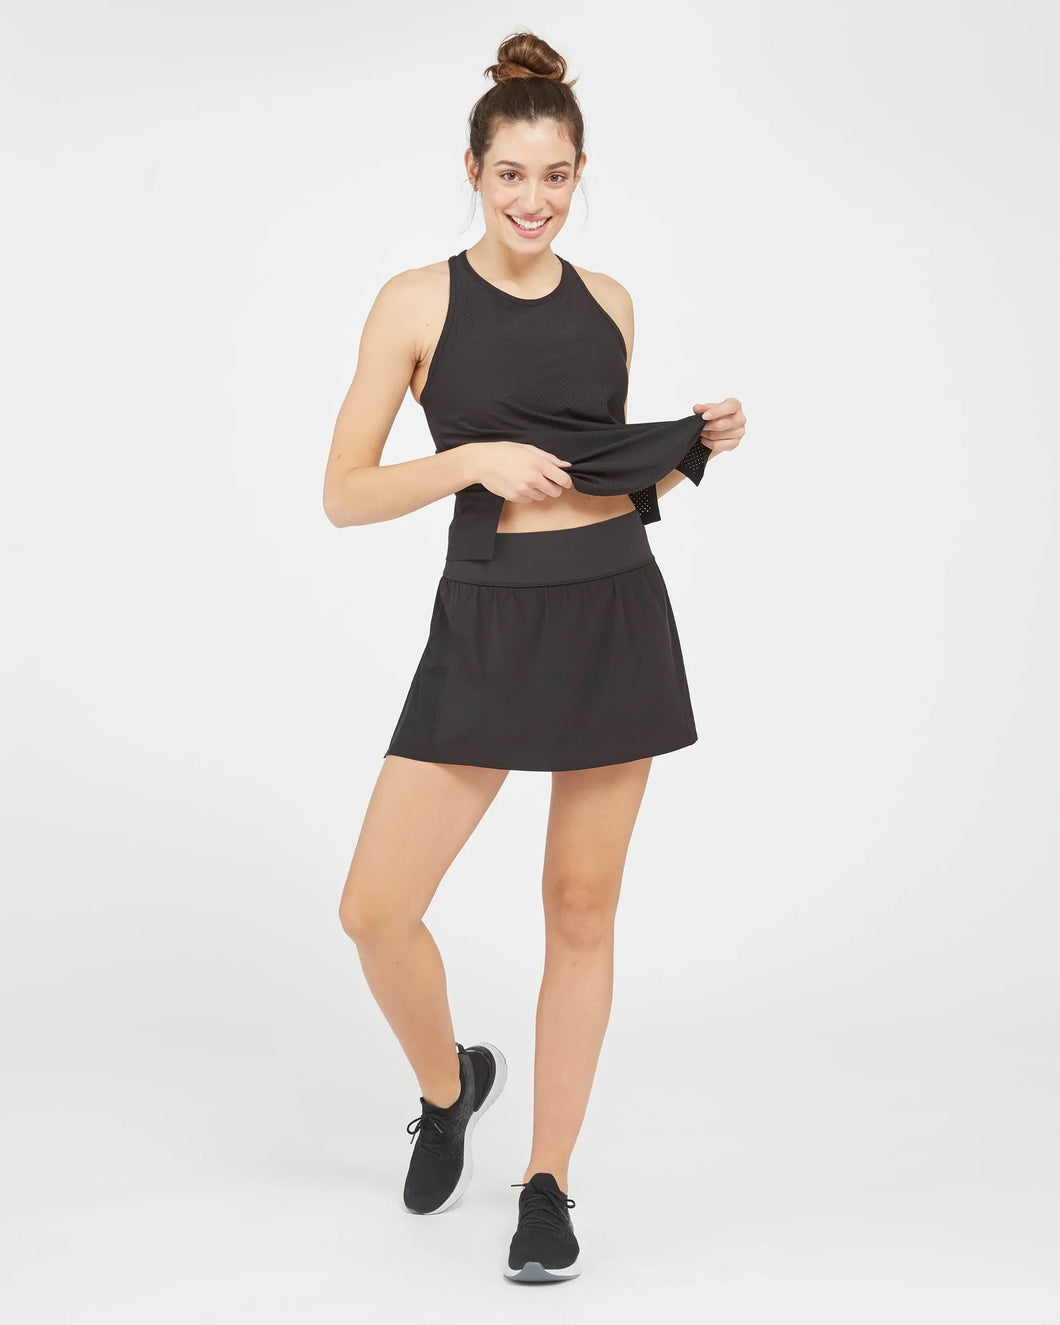 RESTOCK! SPANX Get Moving Skort in Black and White – AH Collection